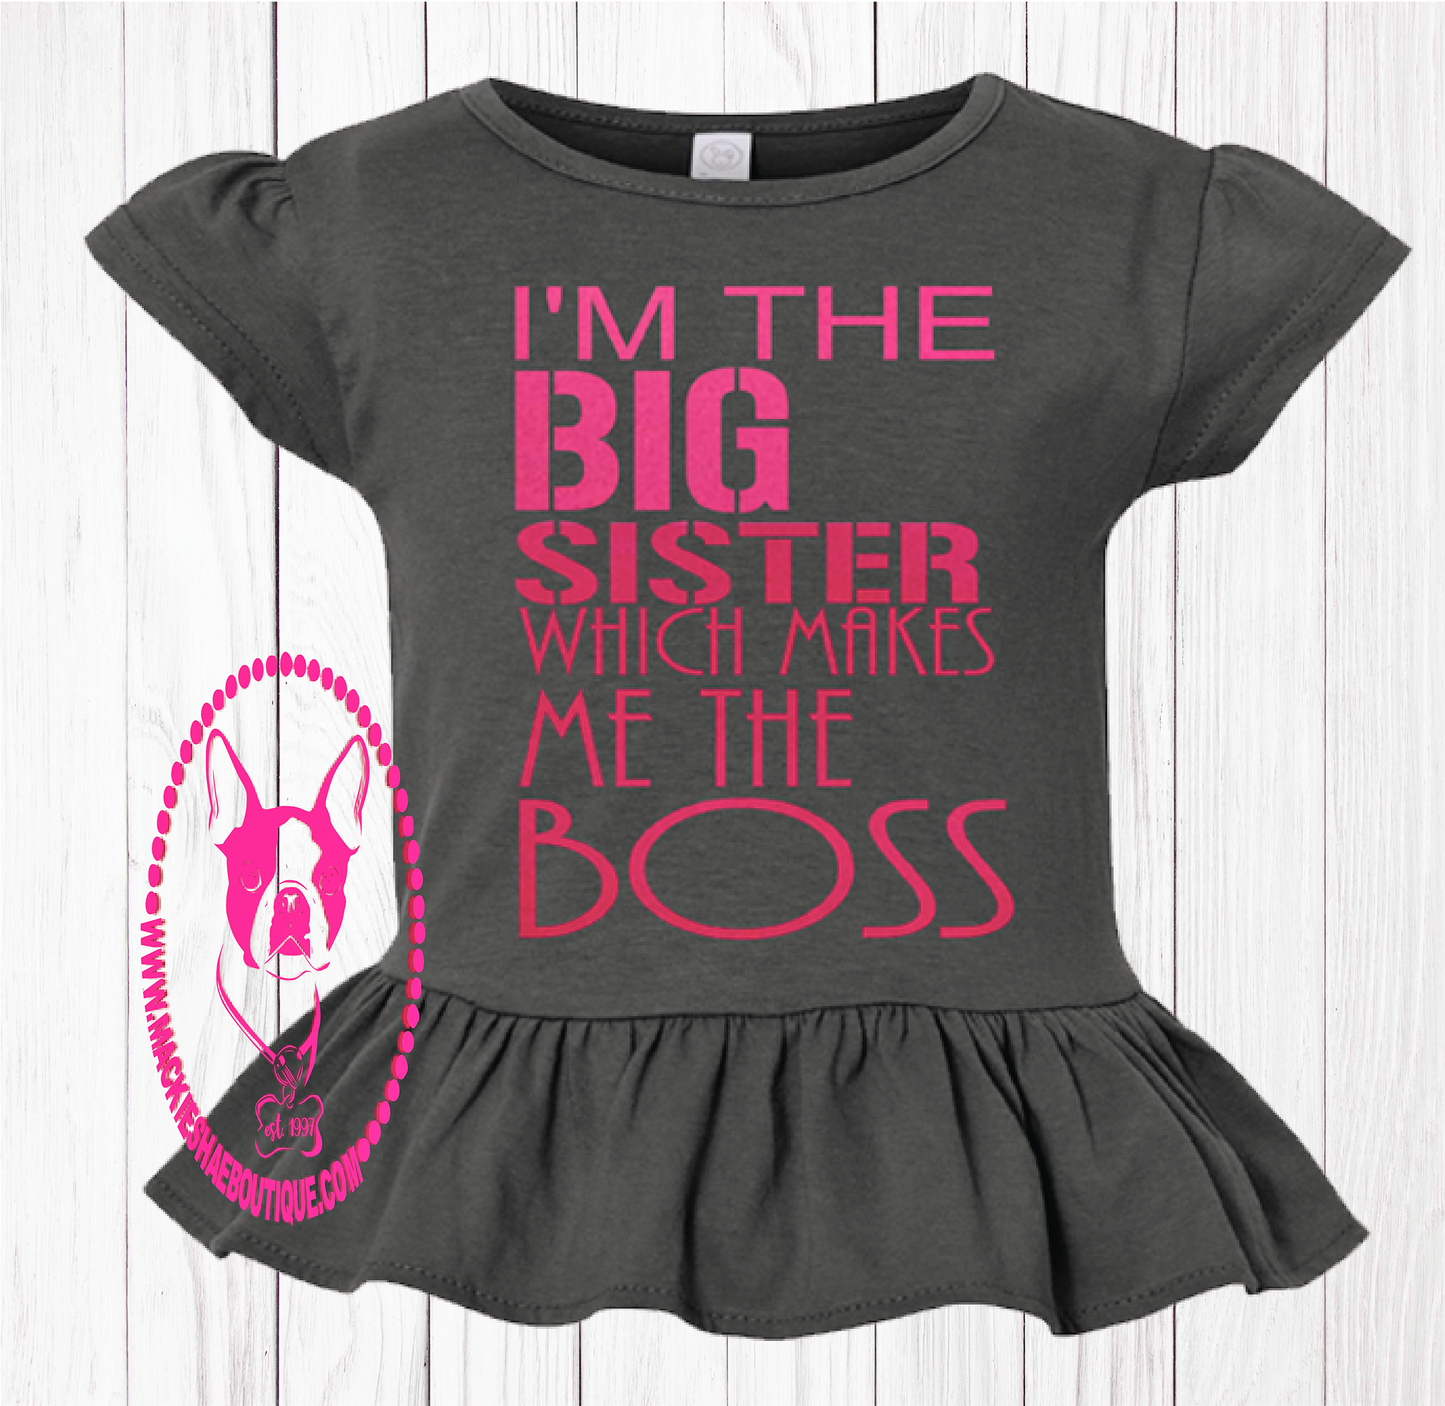 I'm the Big Sister Which Makes Me The Boss Custom Ruffle Shirt for Kids, Short Sleeve